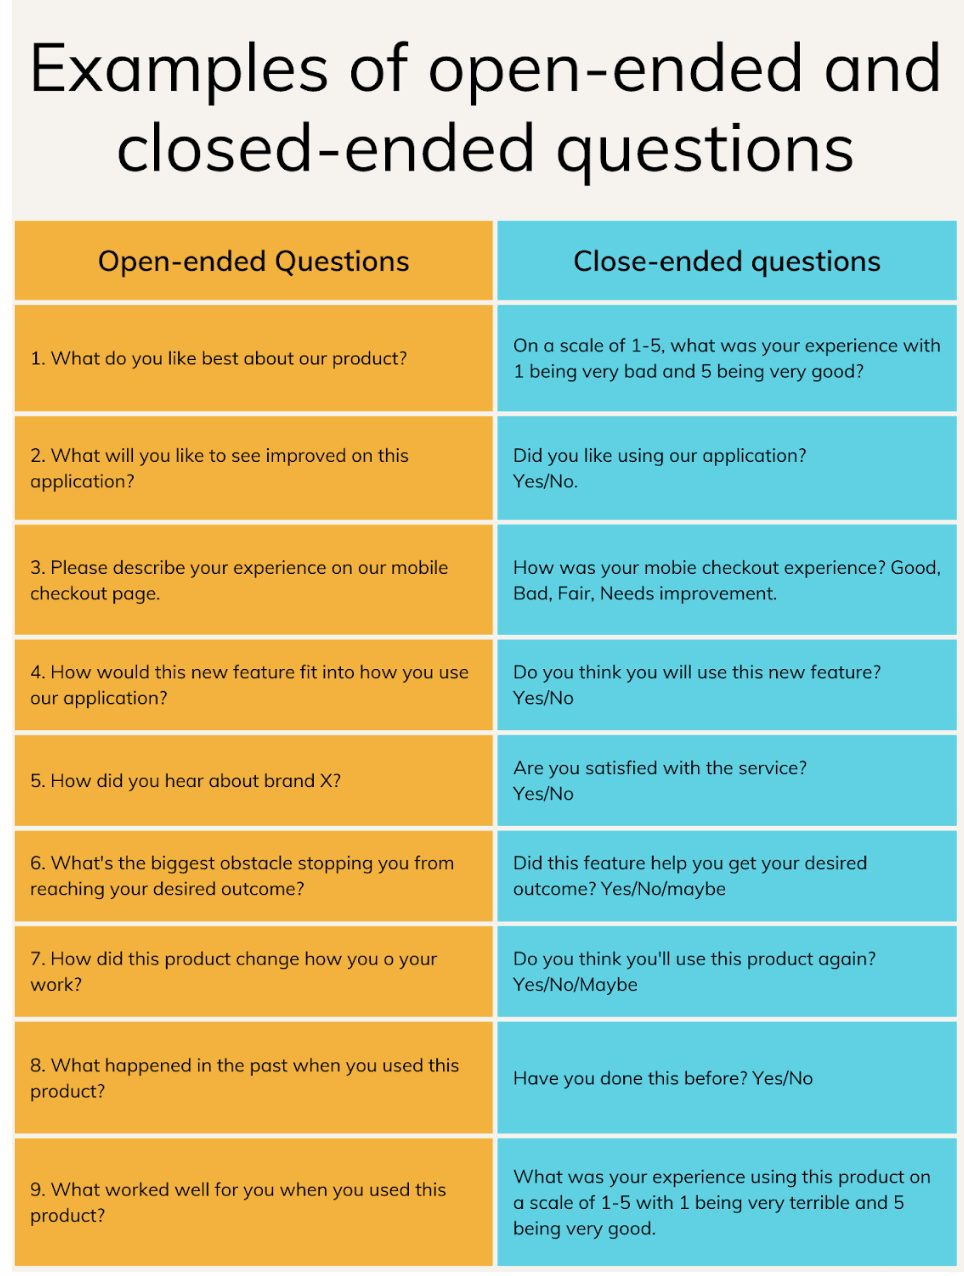 examples of open-ended and closed-ended questions.